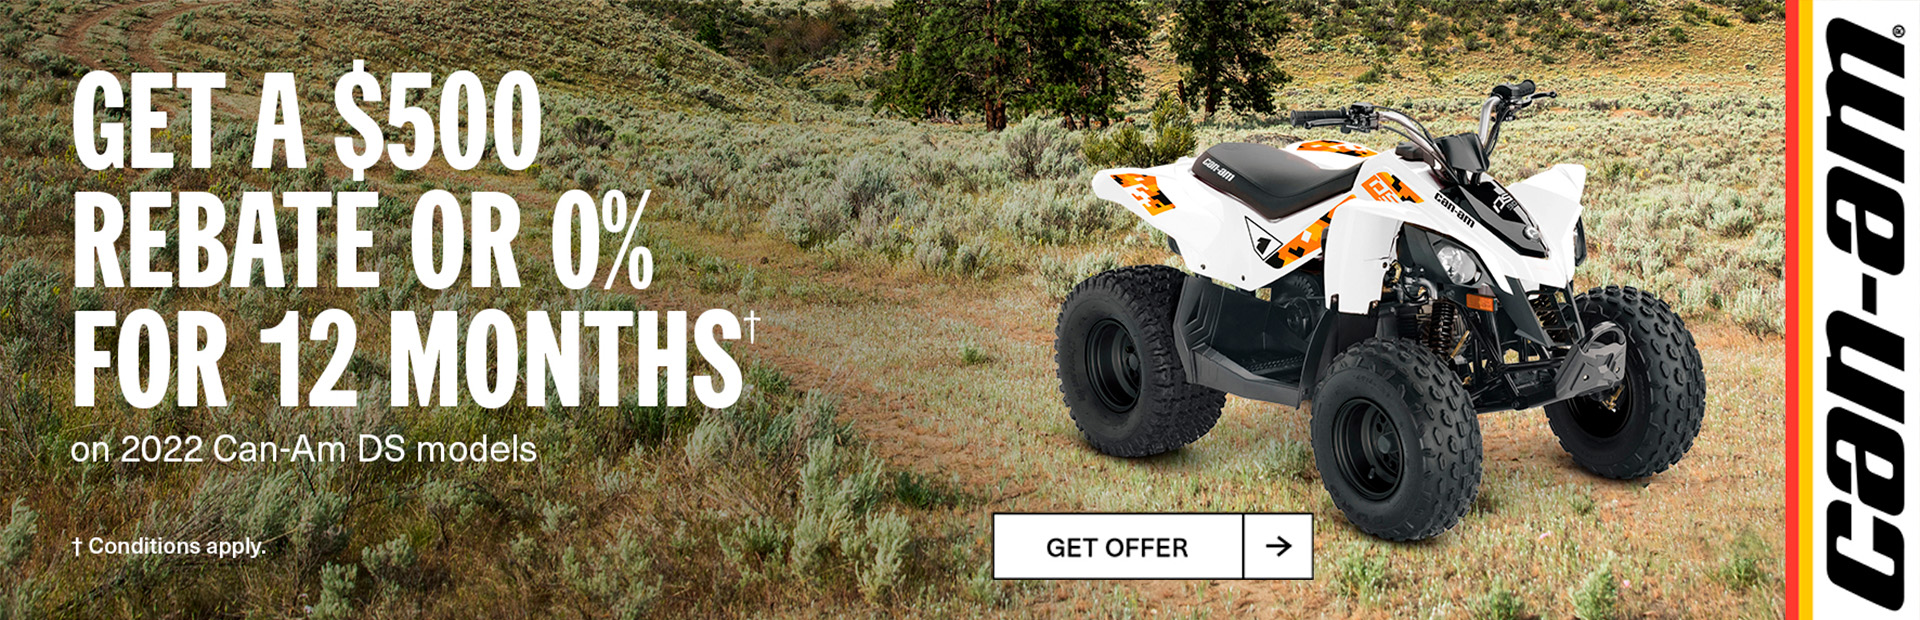 Can am Off Road - Retail Promotion at Wood Powersports Harrison